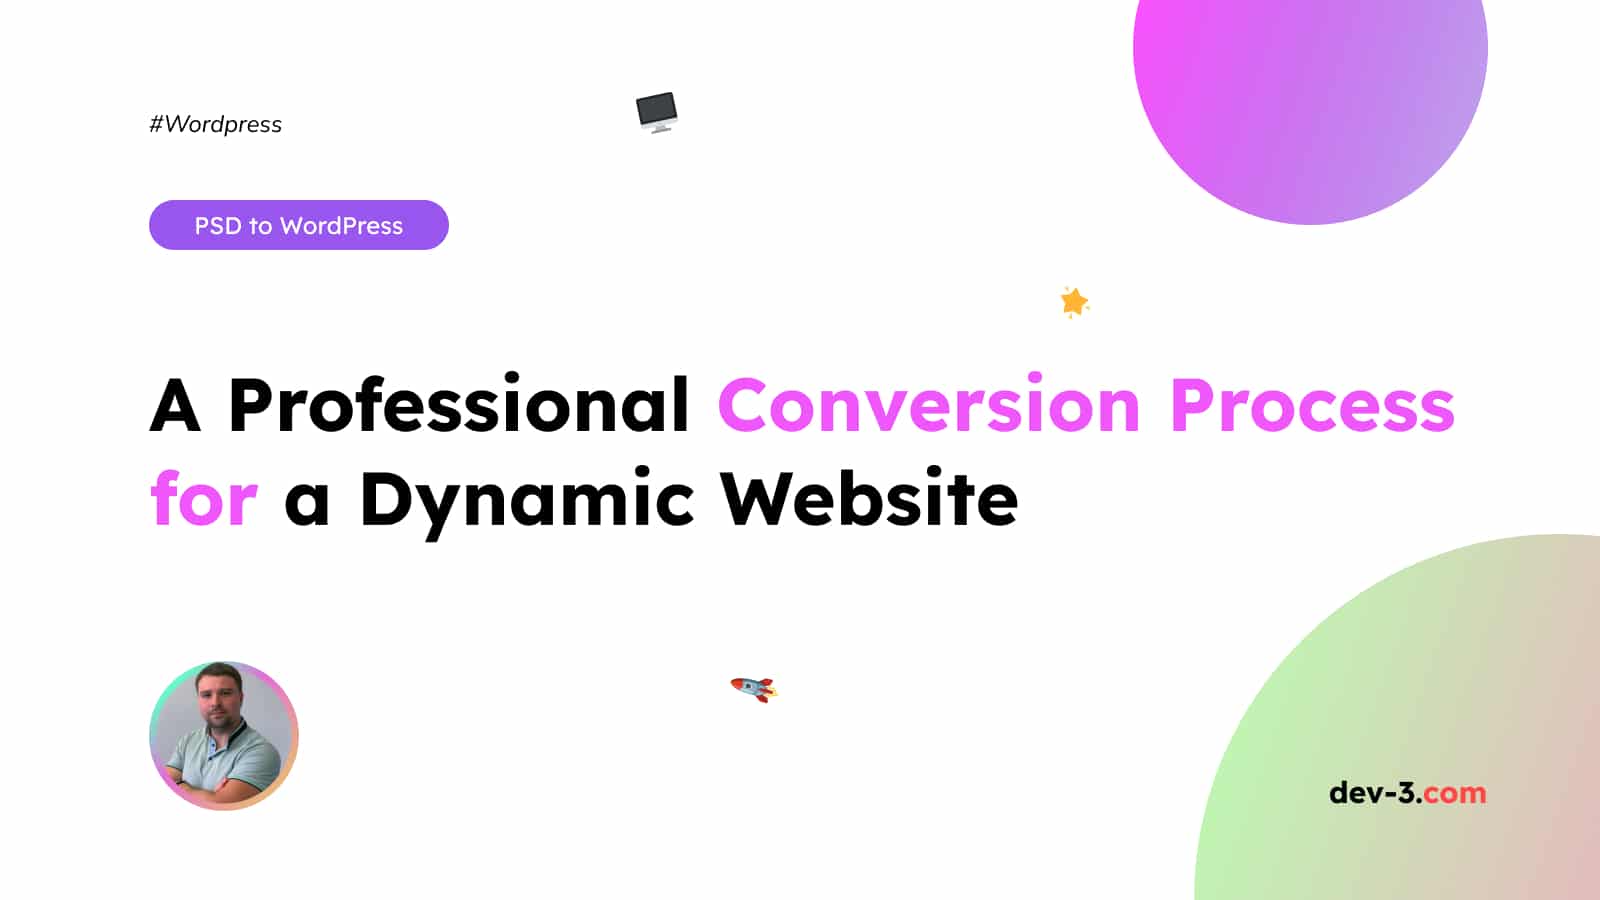 PSD to WordPress: A Professional Conversion Process for a Dynamic Website